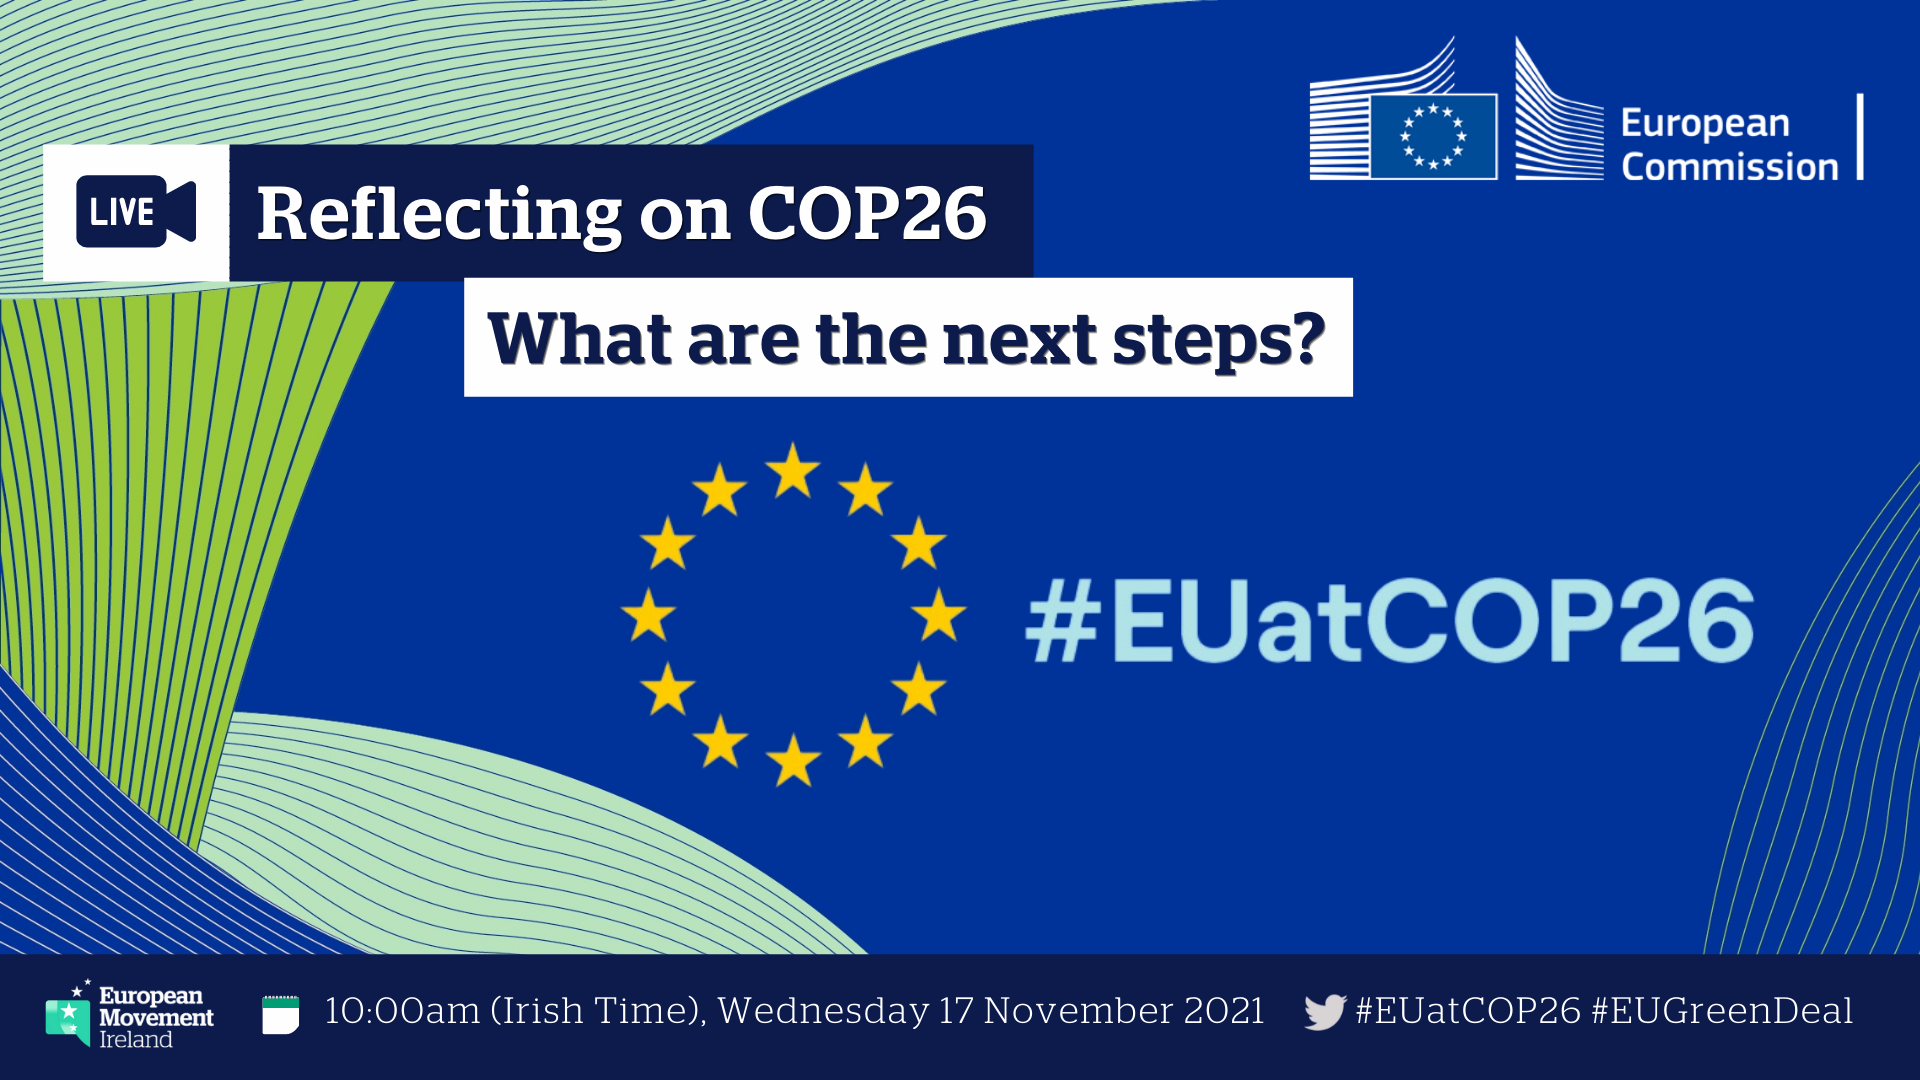 Reflecting on COP26: What are the next steps? - promo image for event